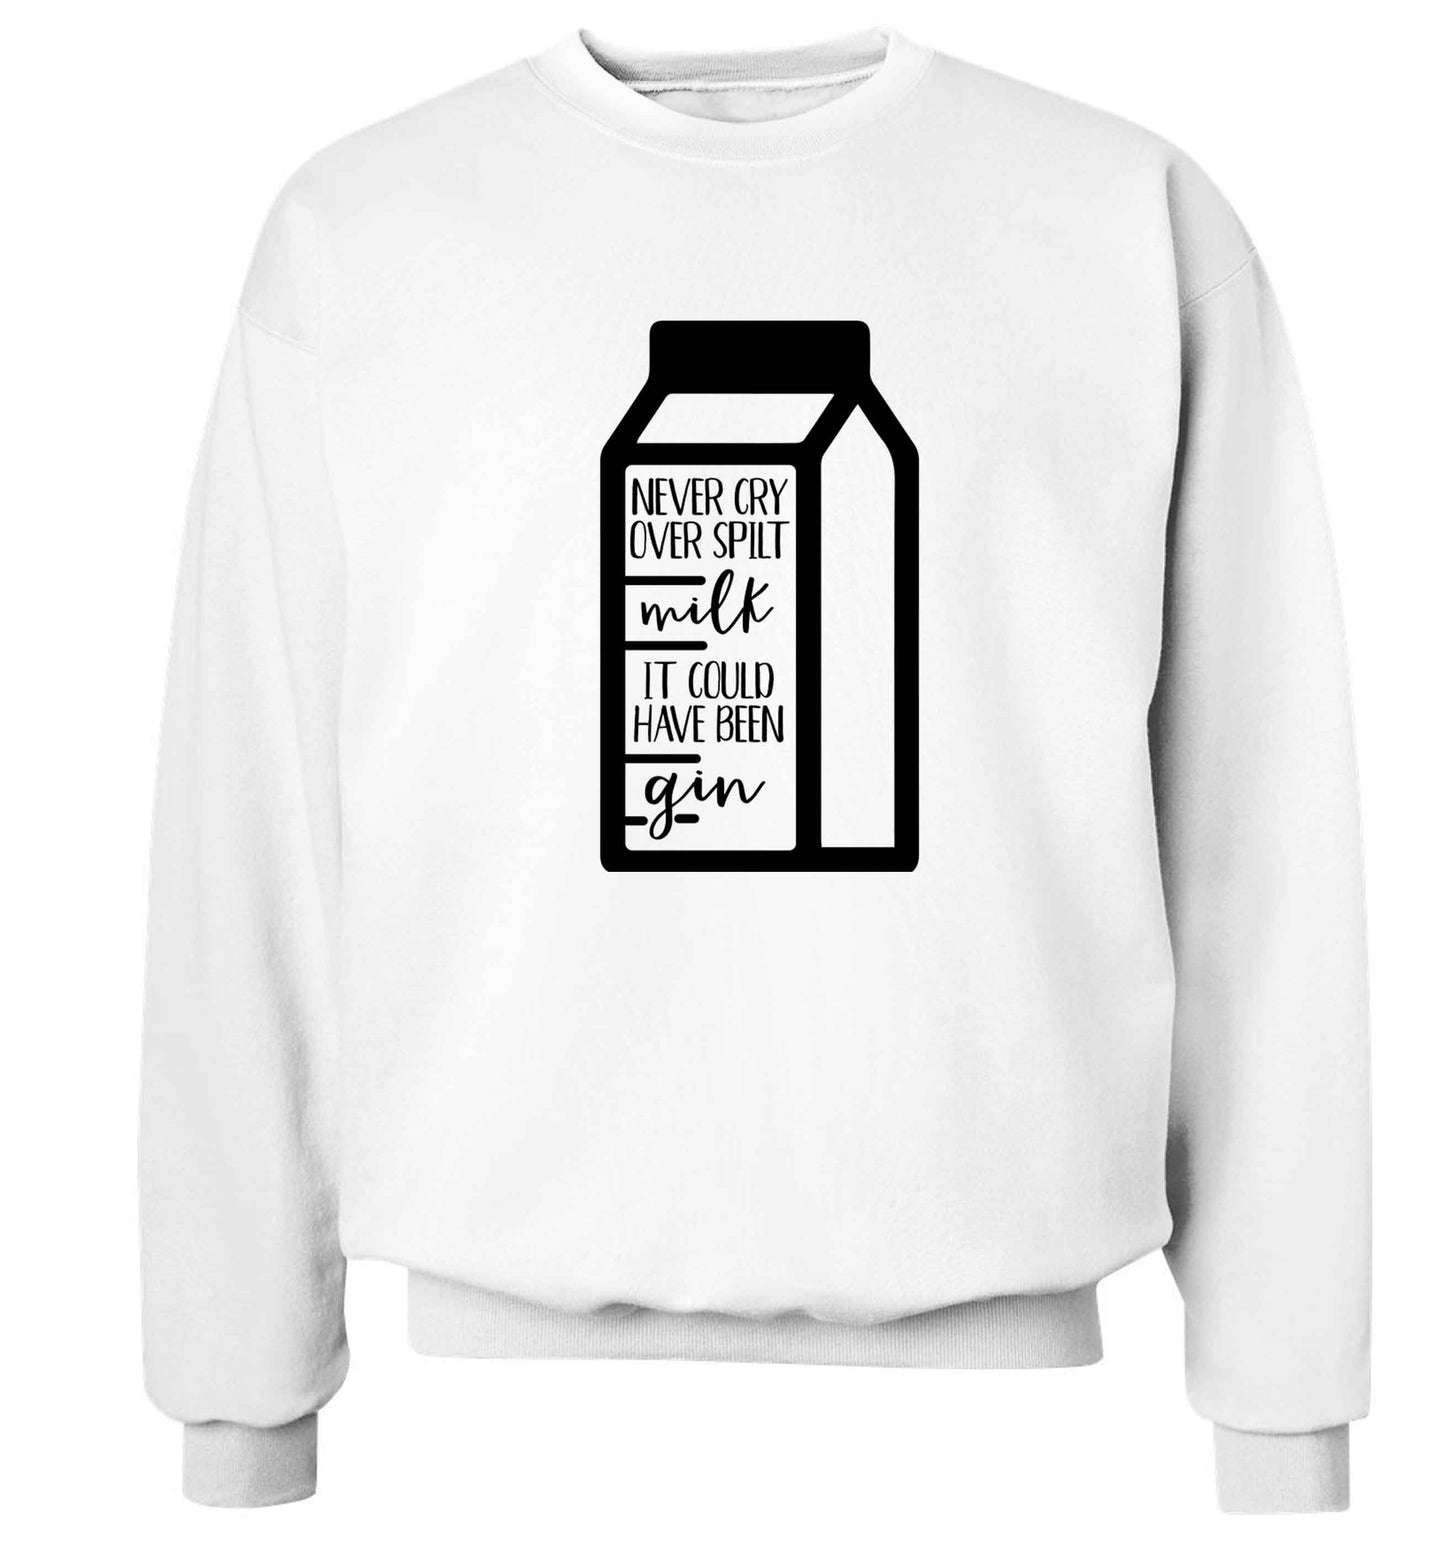 Never cry over spilt milk, it could have been gin Adult's unisex white Sweater 2XL